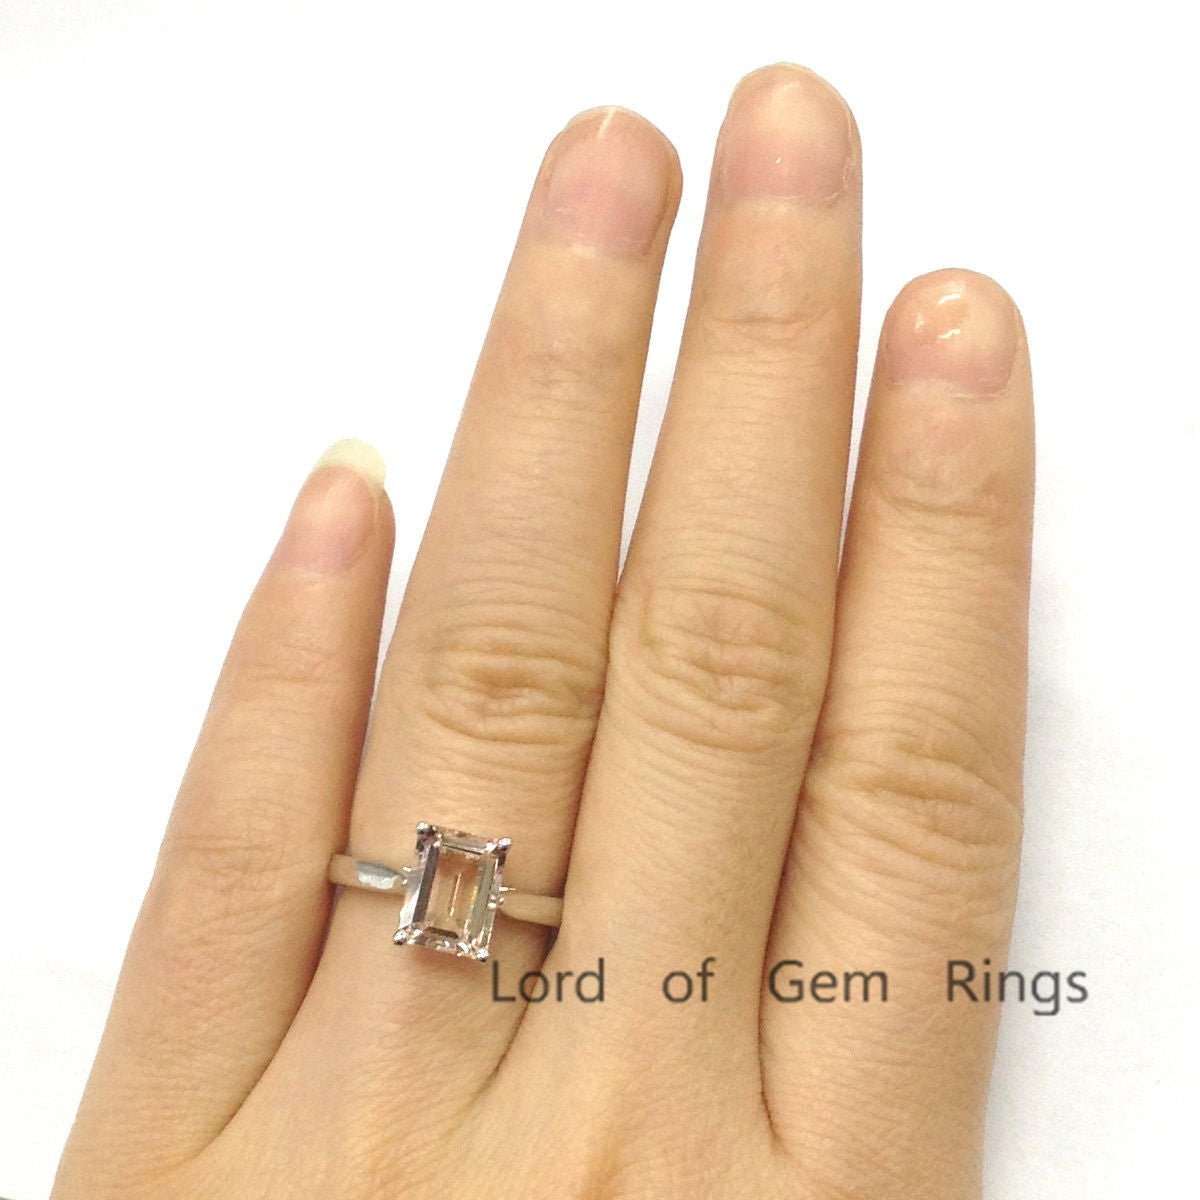 Emerald Cut Morganite Hidden Lovely Heart Solitaire Ring - Lord of Gem Rings